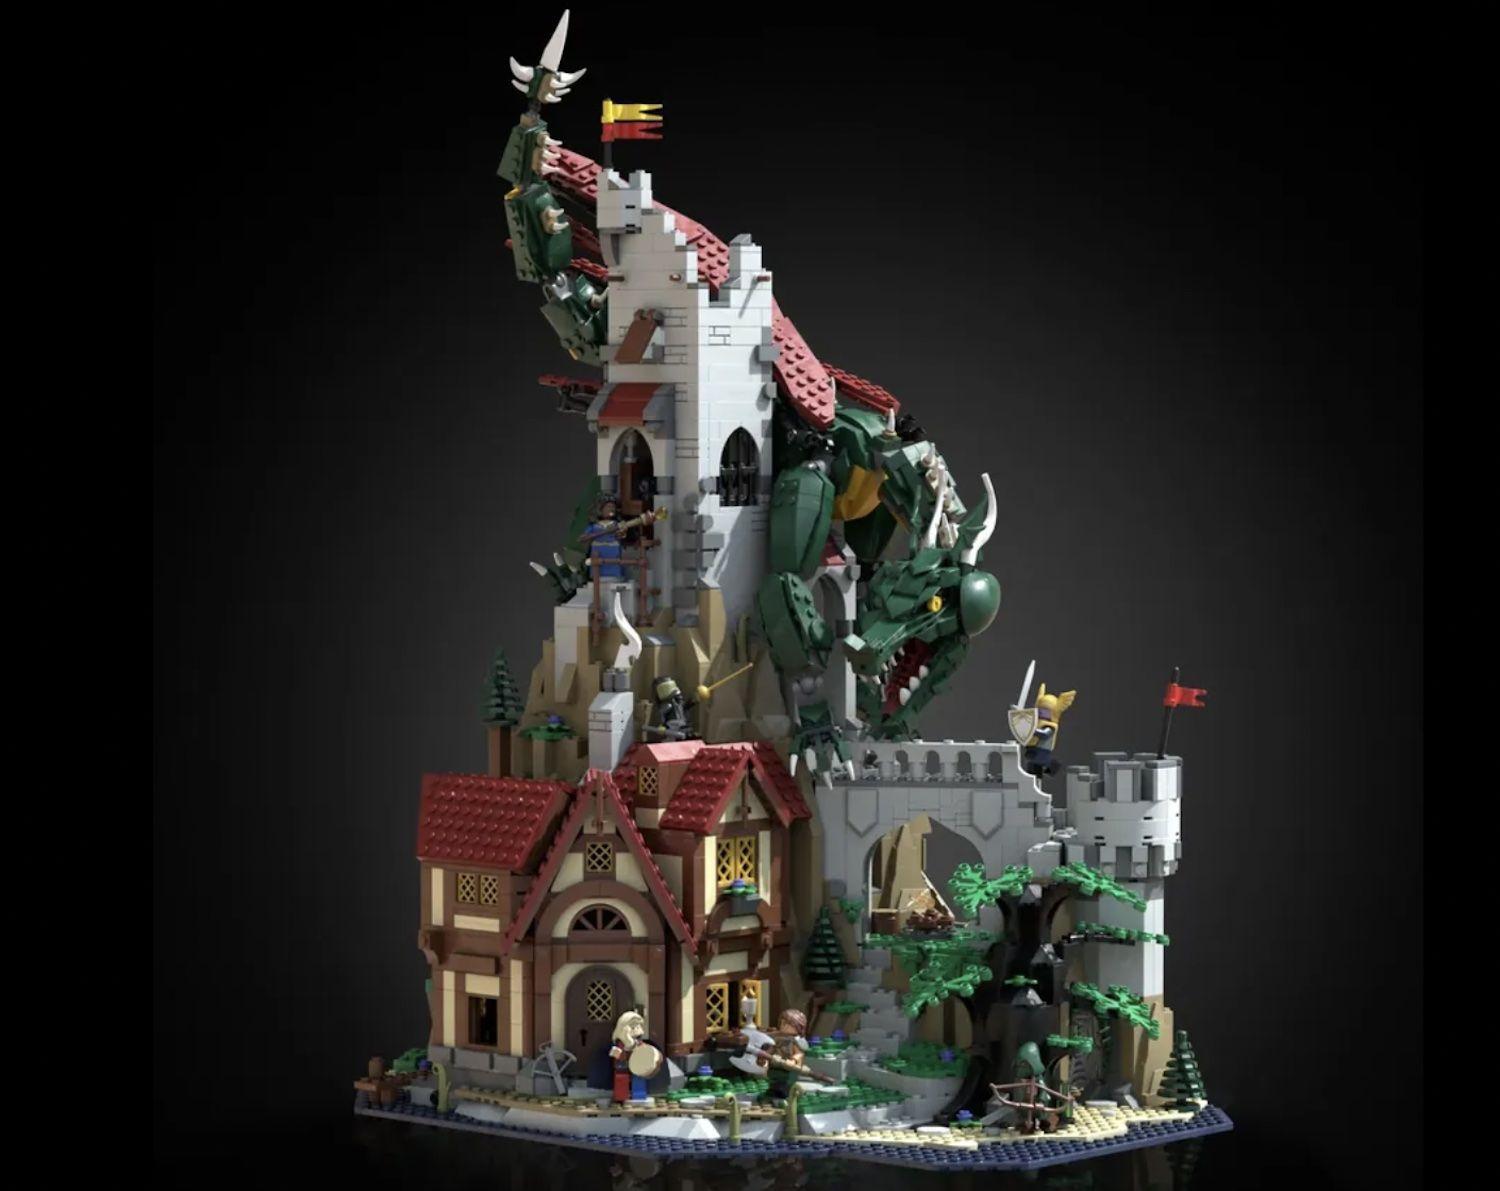 And the LEGO and Dungeon & Dragons Winner is...